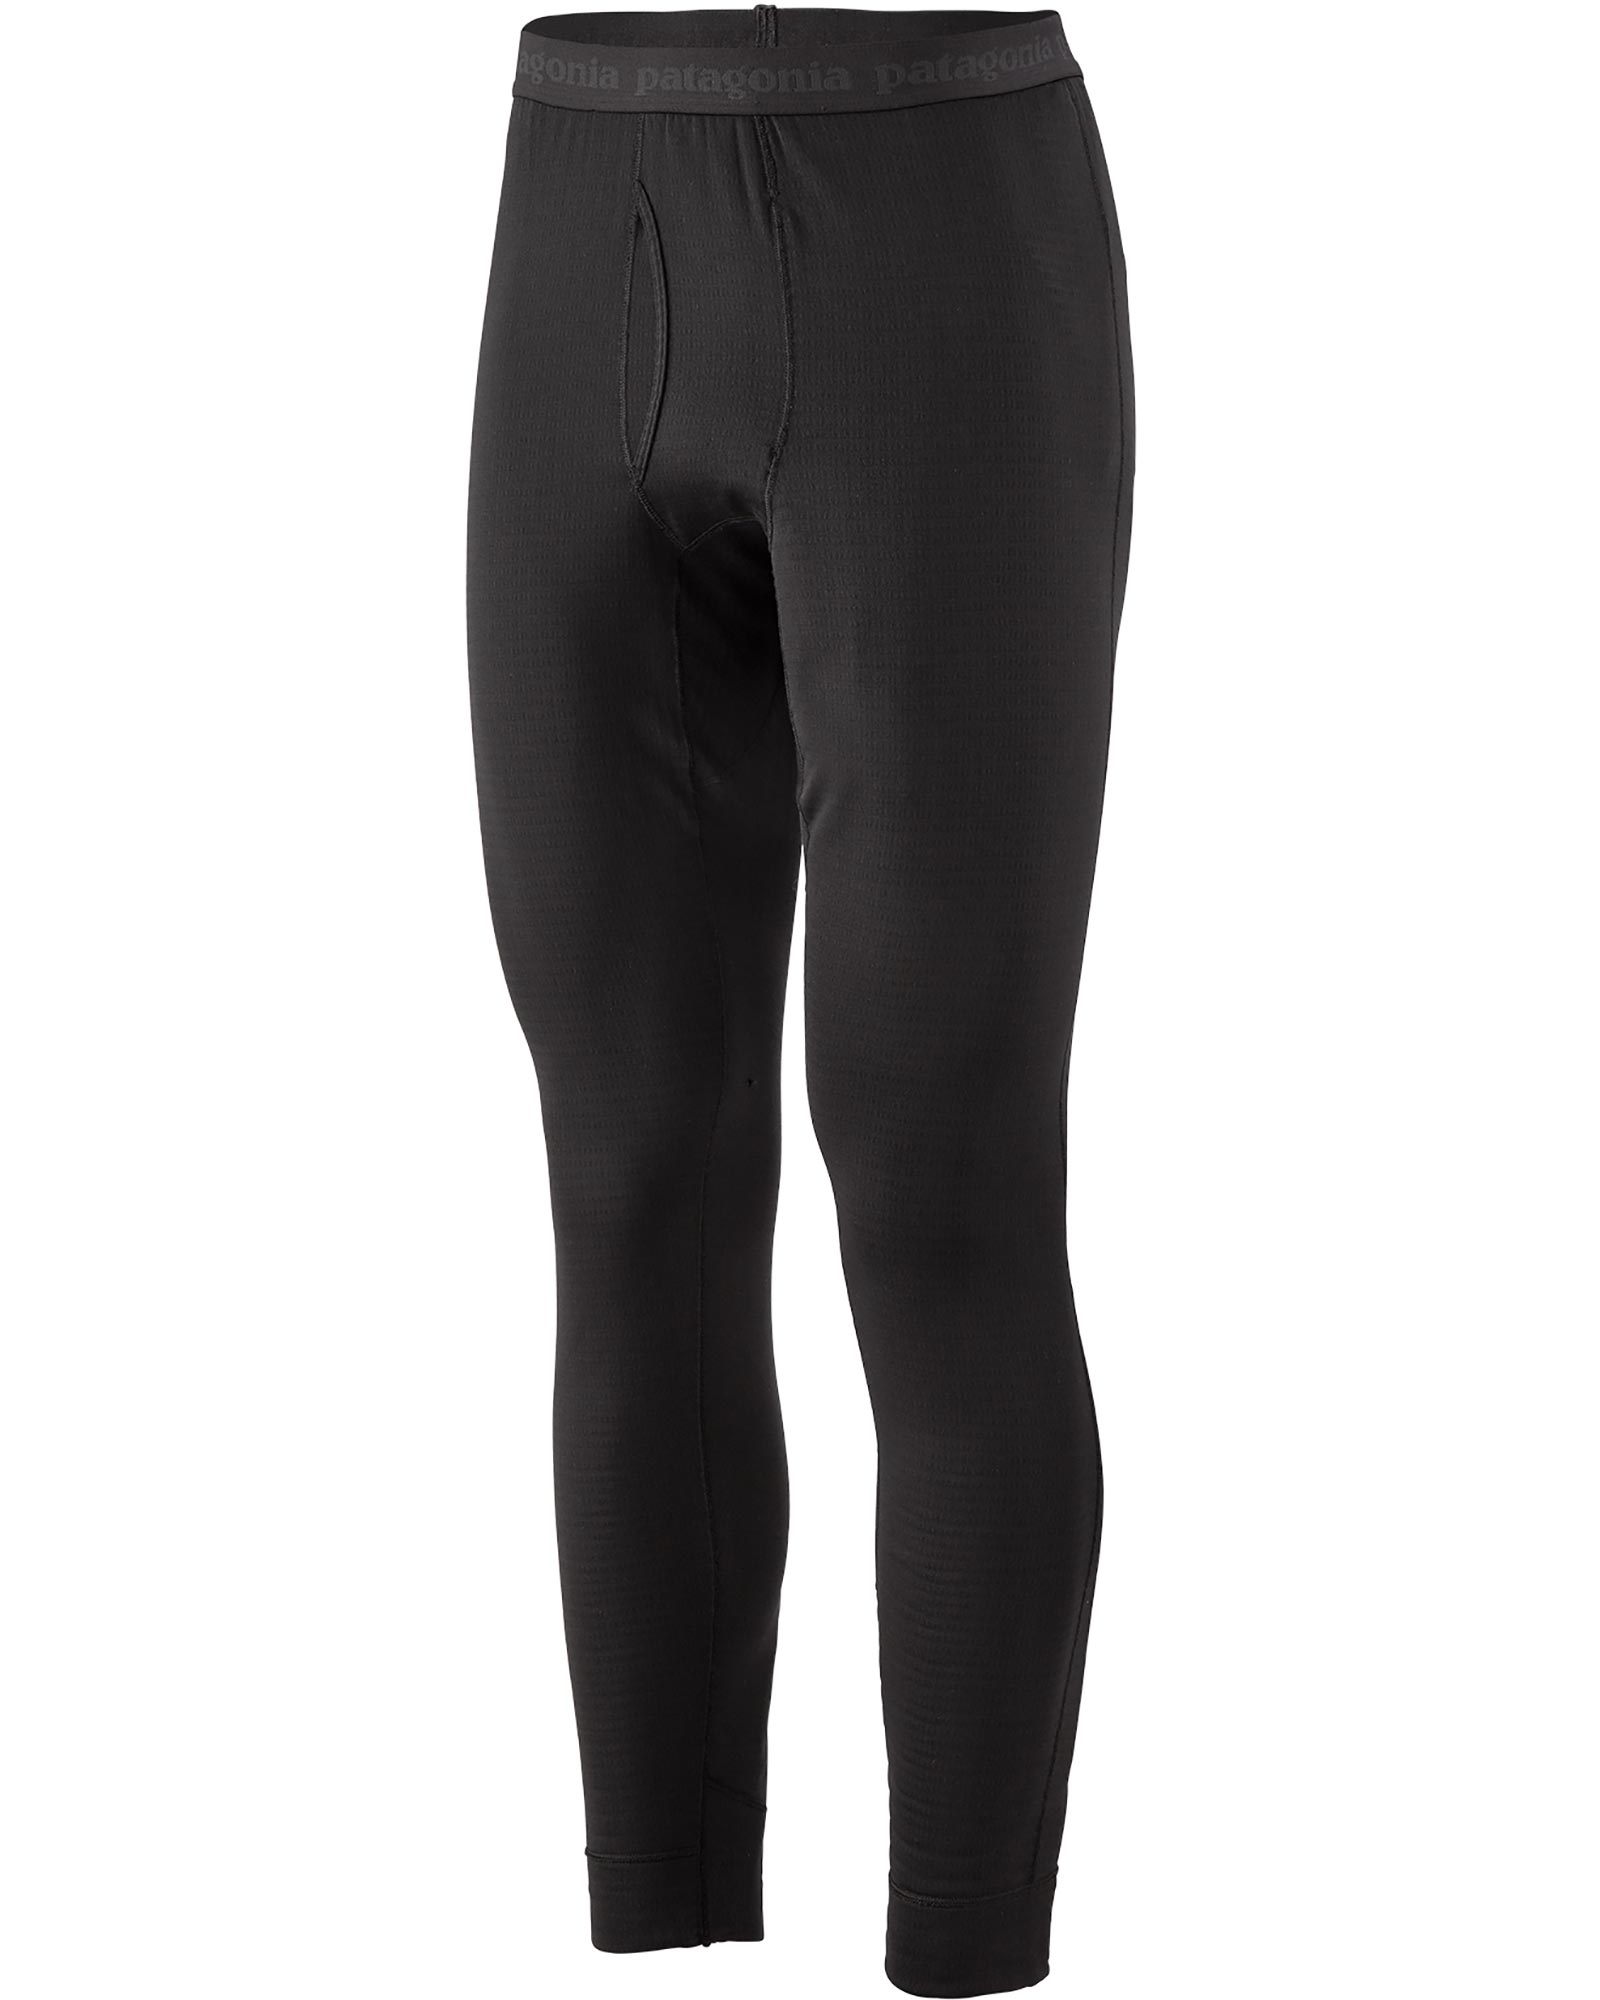 Patagonia Capilene Men’s Thermal Weight Tights - black L